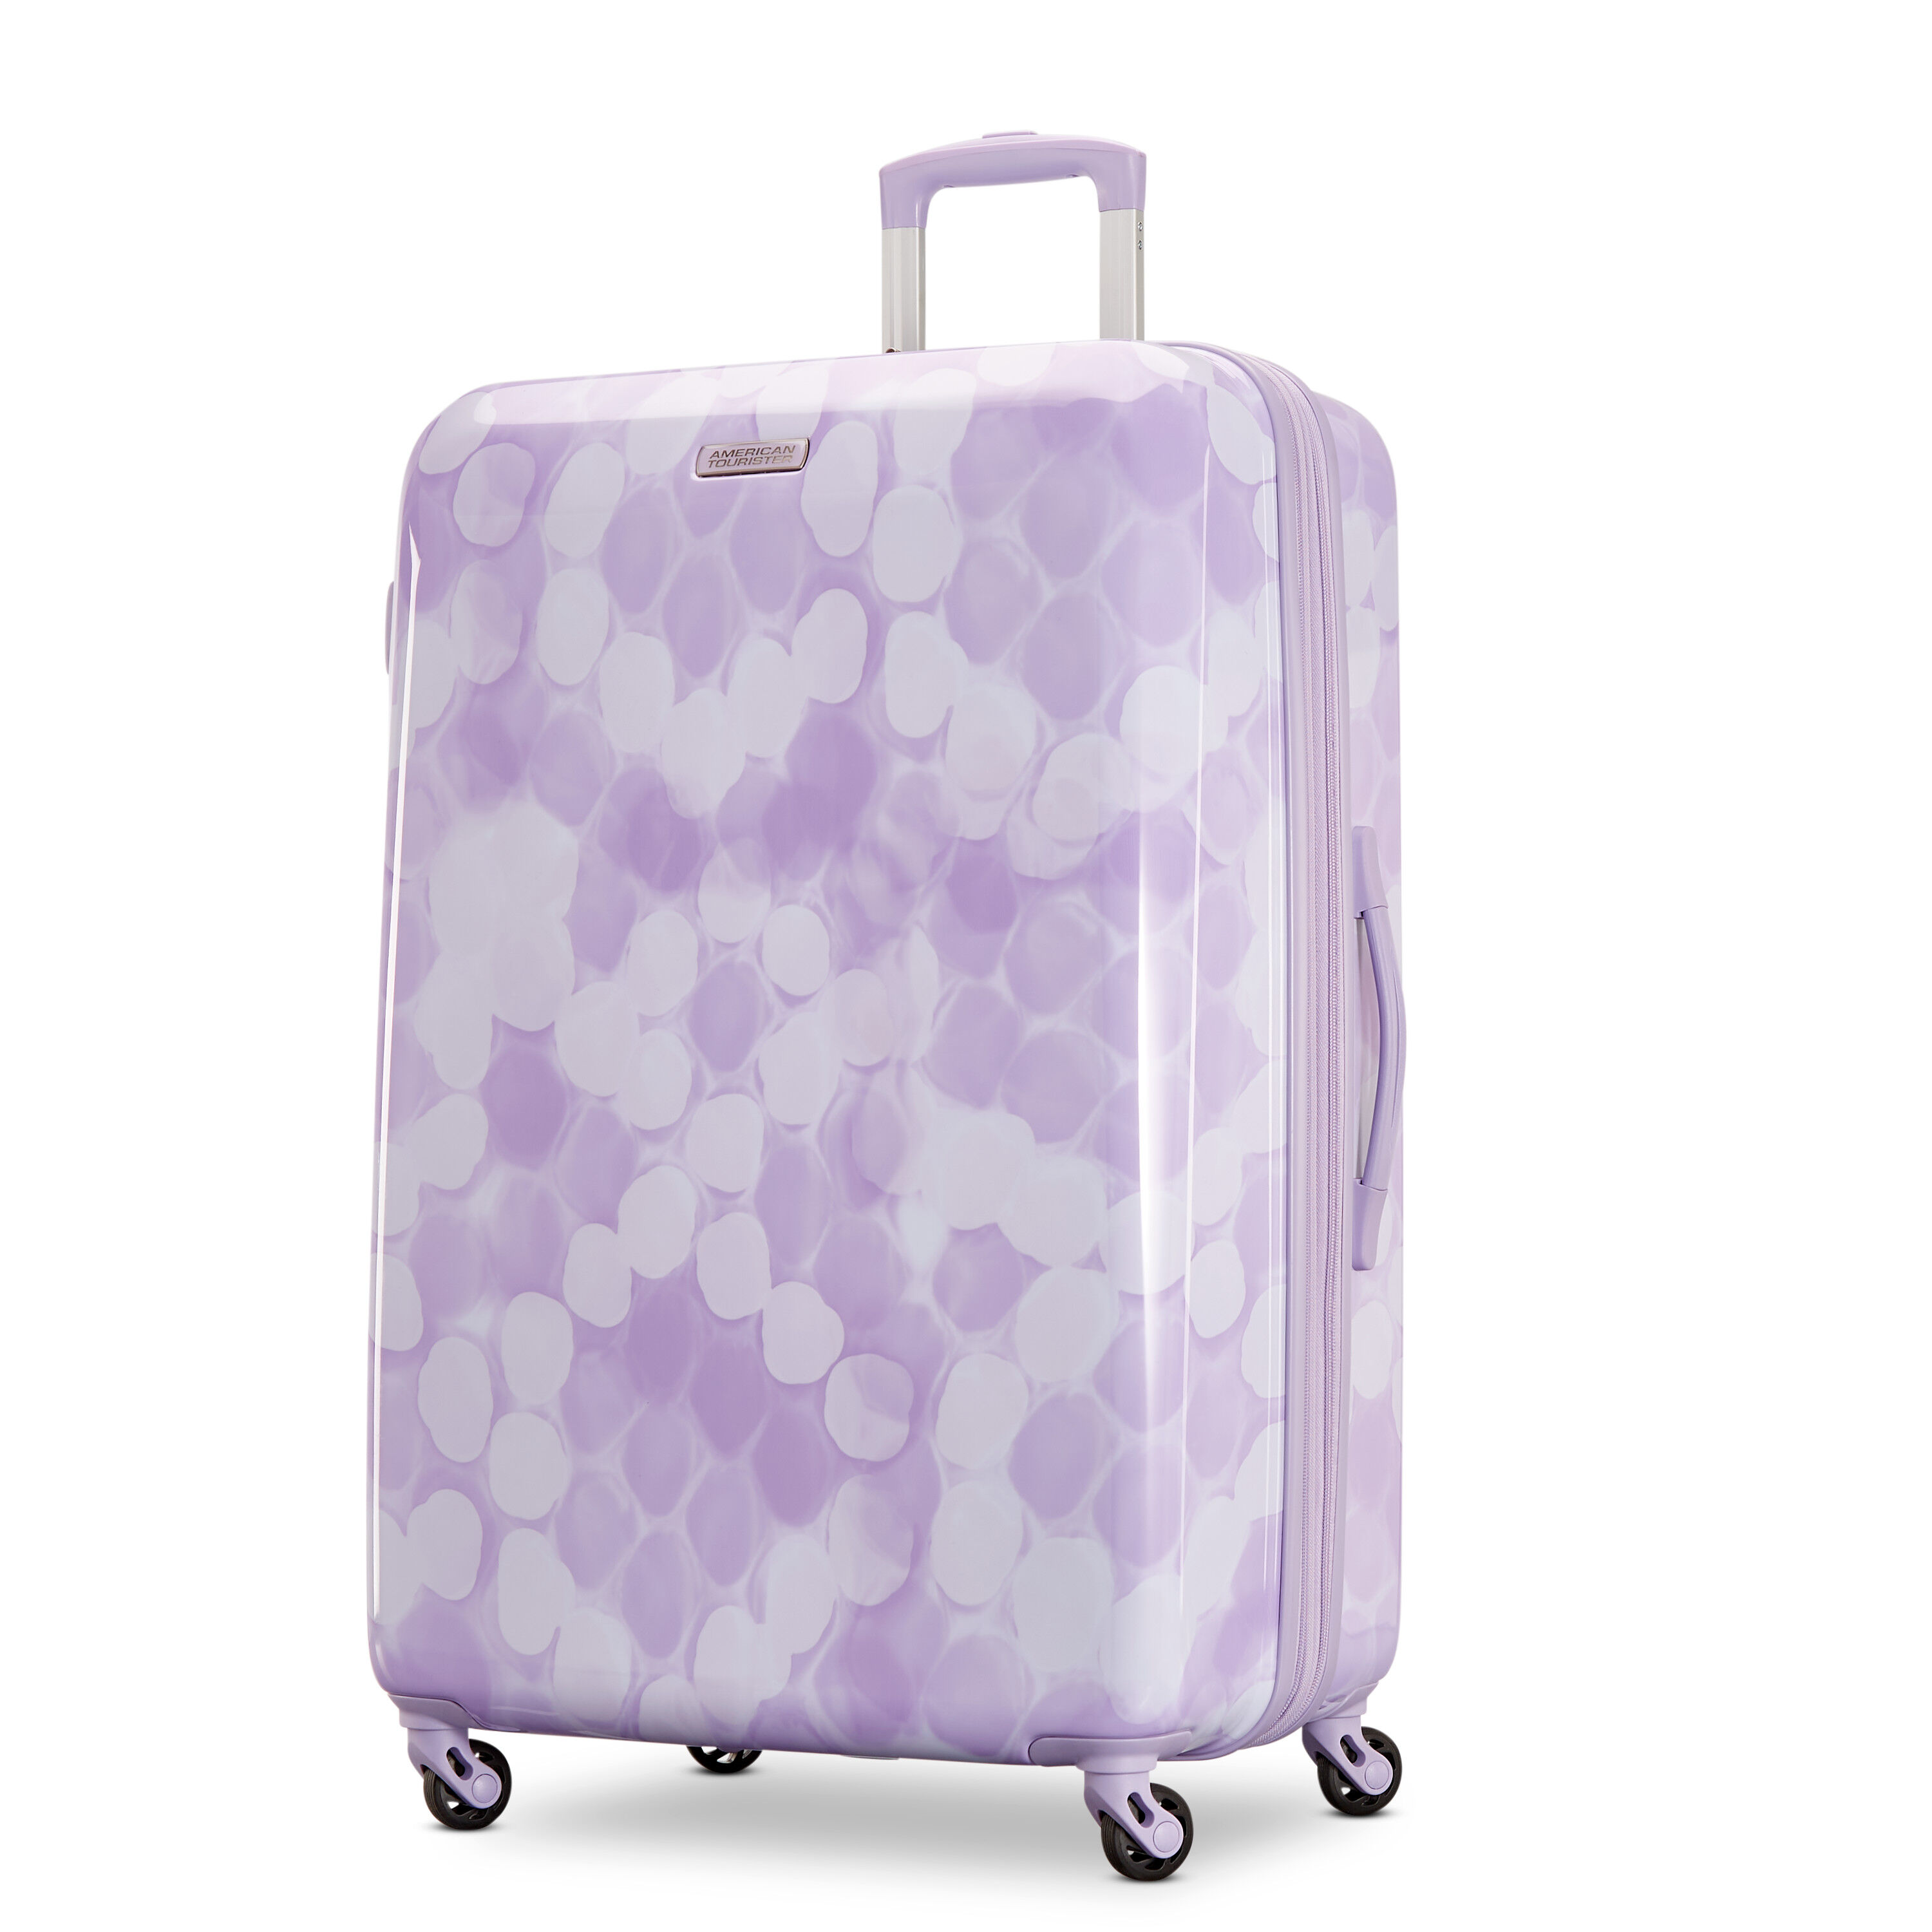 Moonlight: Sleek Luggage Collection | American Tourister